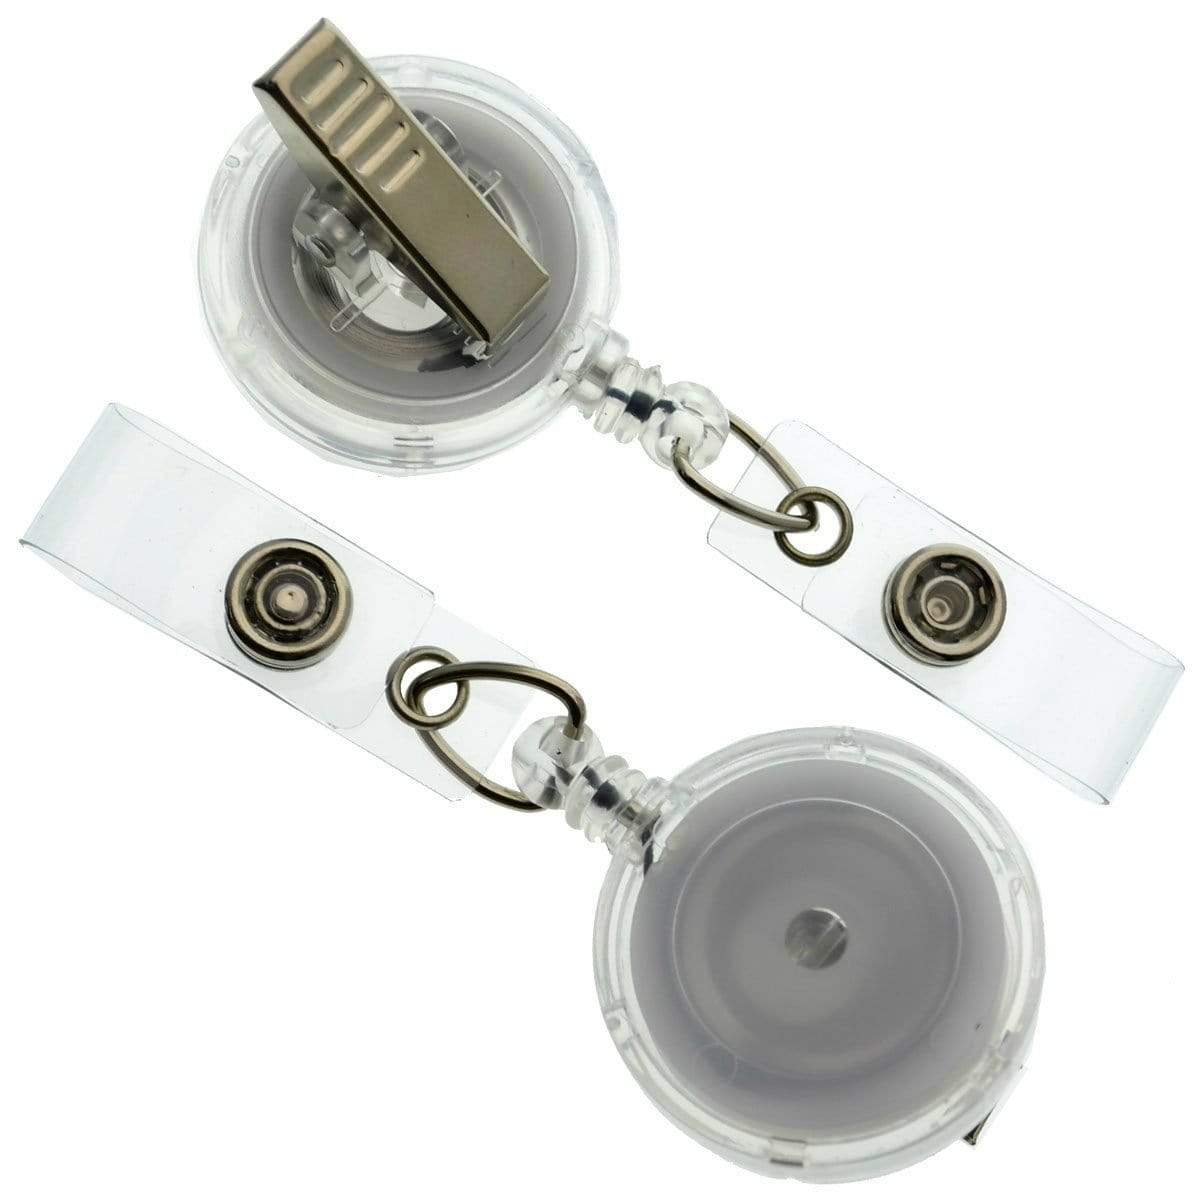 Translucent White (clear) Translucent Badge Reel with Swivel Clip (P/N 2120-762X) 2120-7621